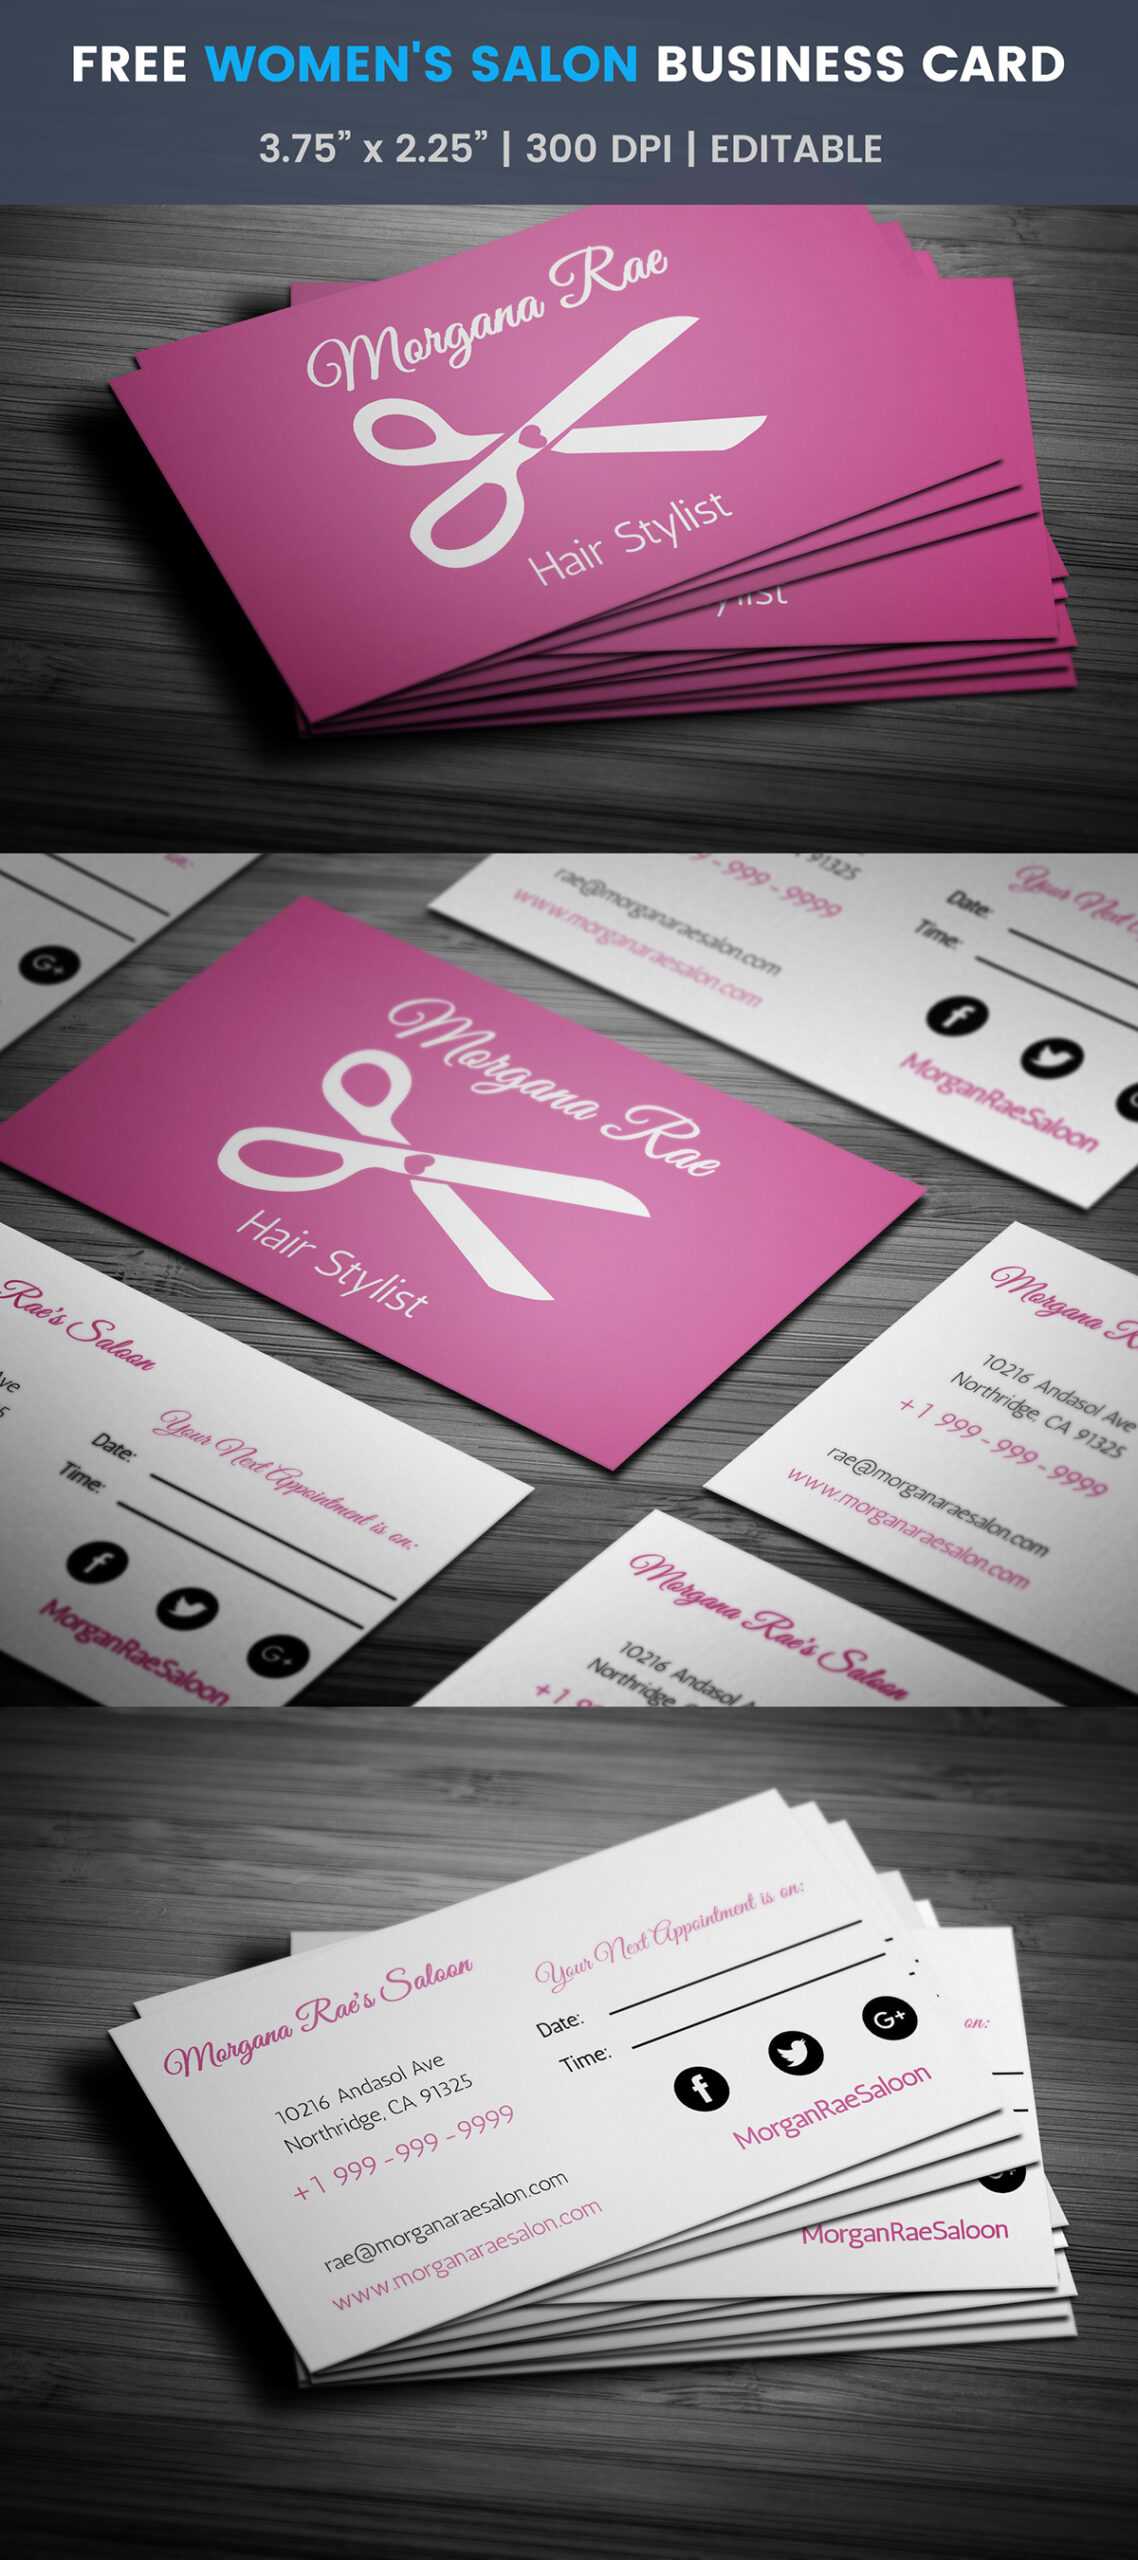 Hairdresser Business Card Templates Free - Calep.midnightpig.co Pertaining To Hairdresser Business Card Templates Free